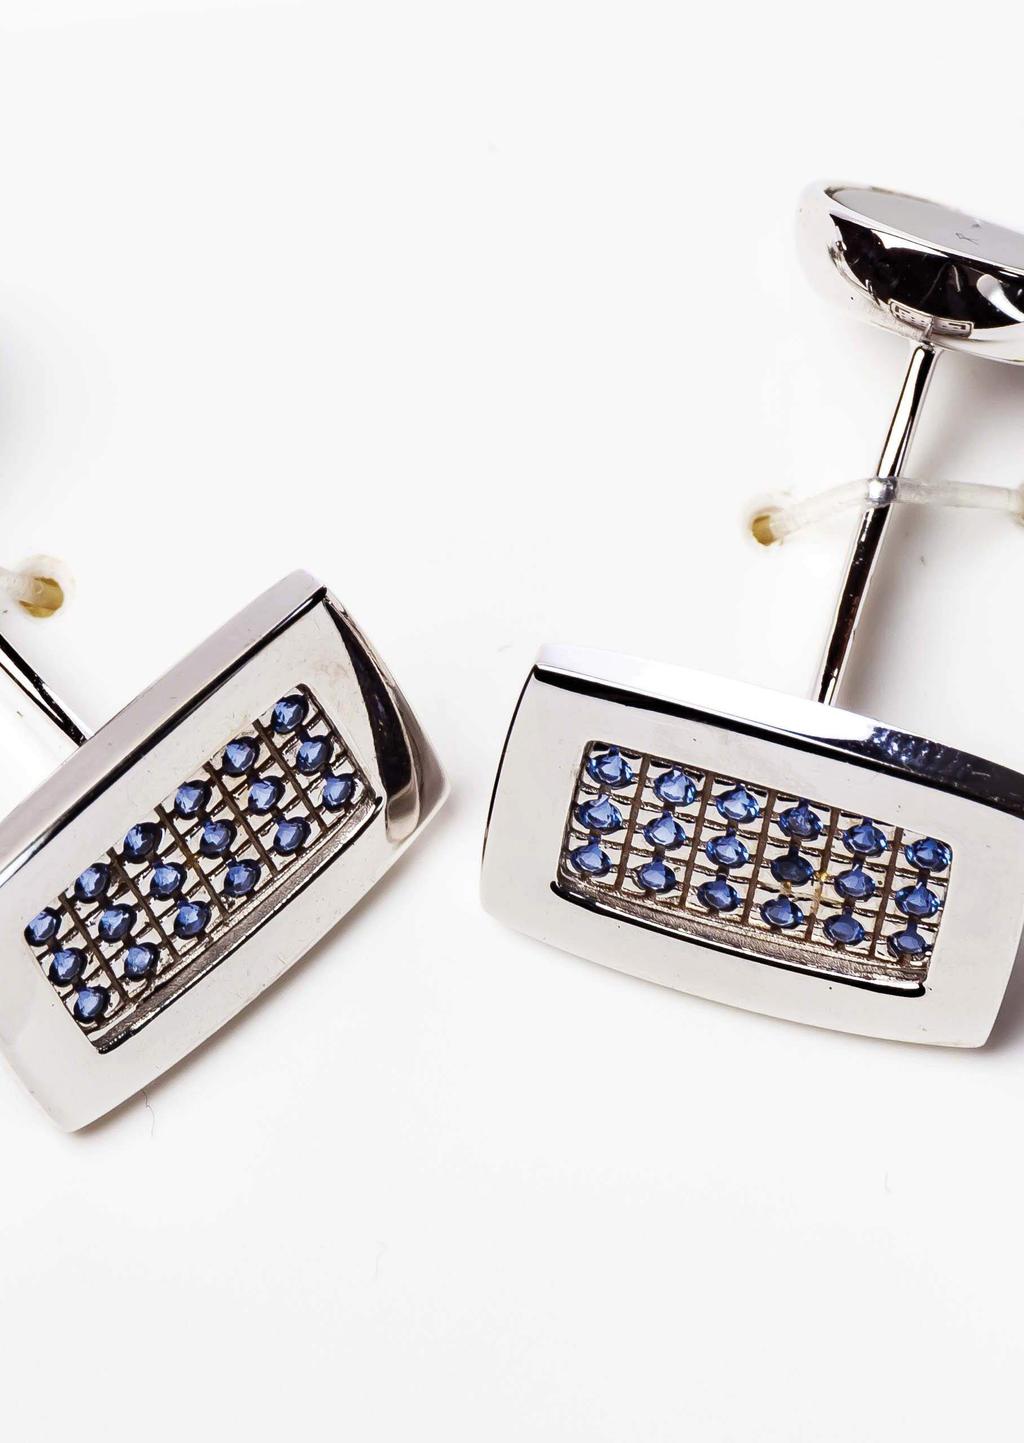 cufflinks When you wear Epiphany cufflinks, you know that they are special.